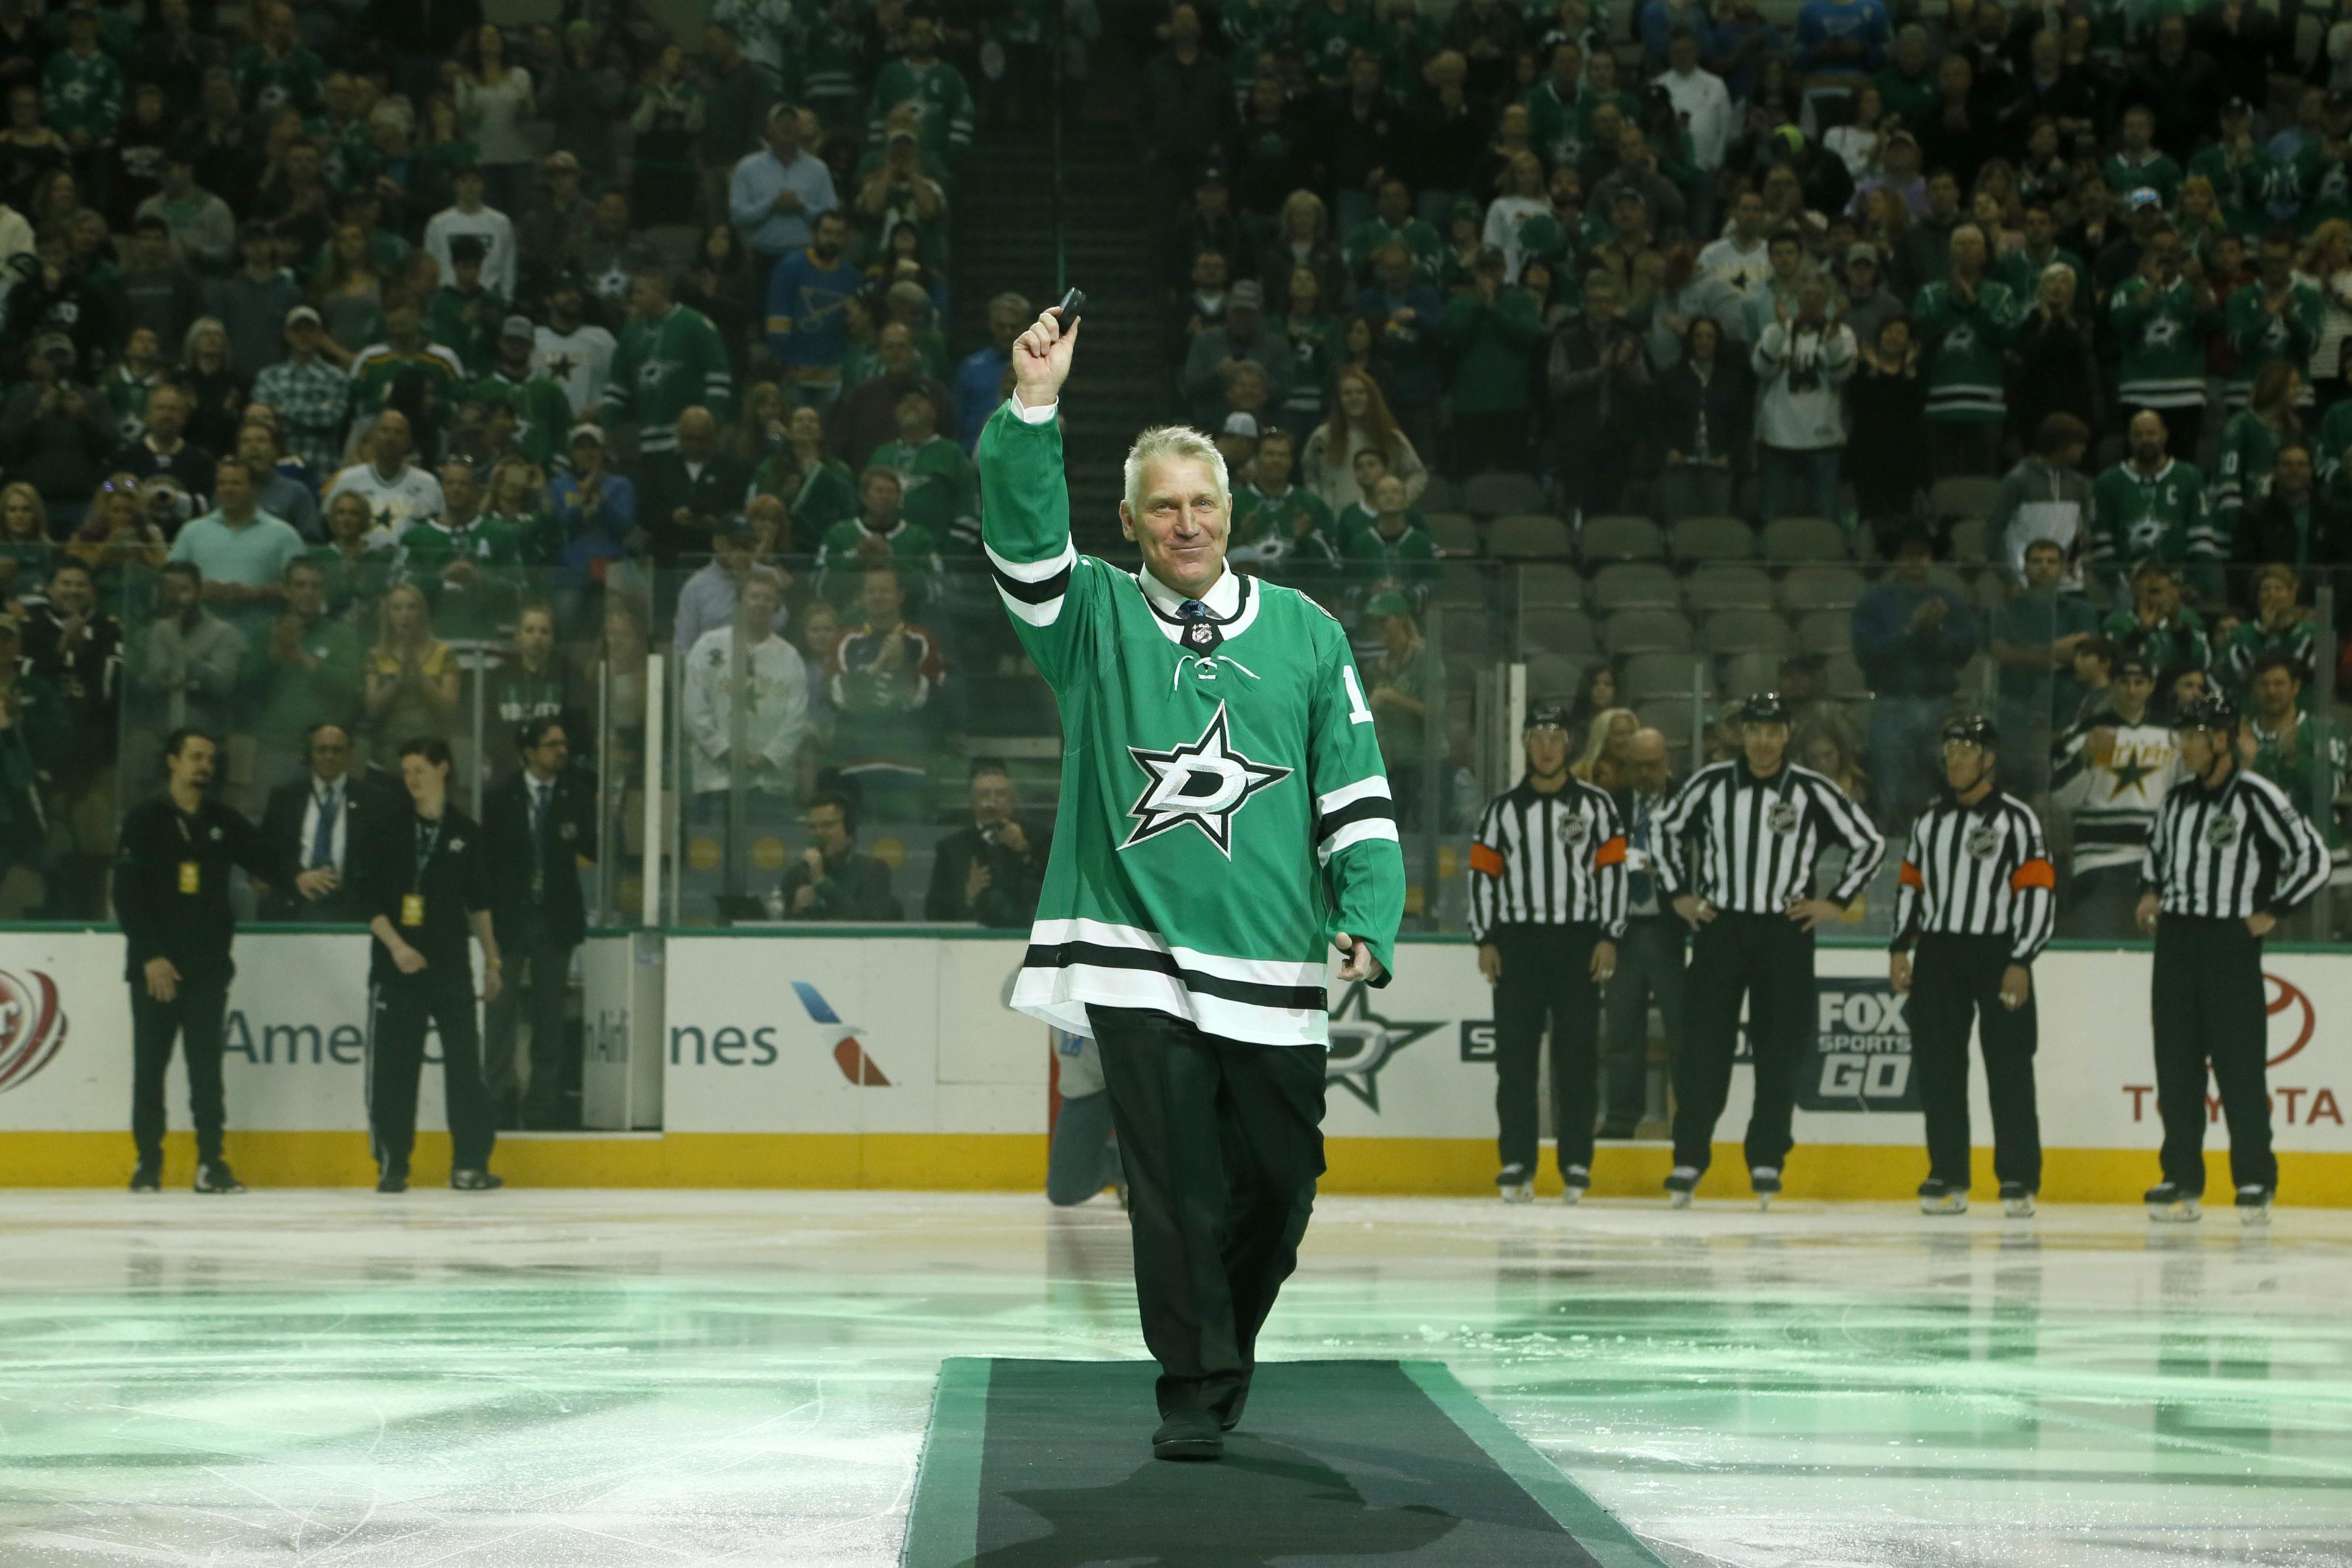 Dallas Stars former player Brett Hull waves to the crowd after a ceremonial puck drop before the game at American Airlines Center. 